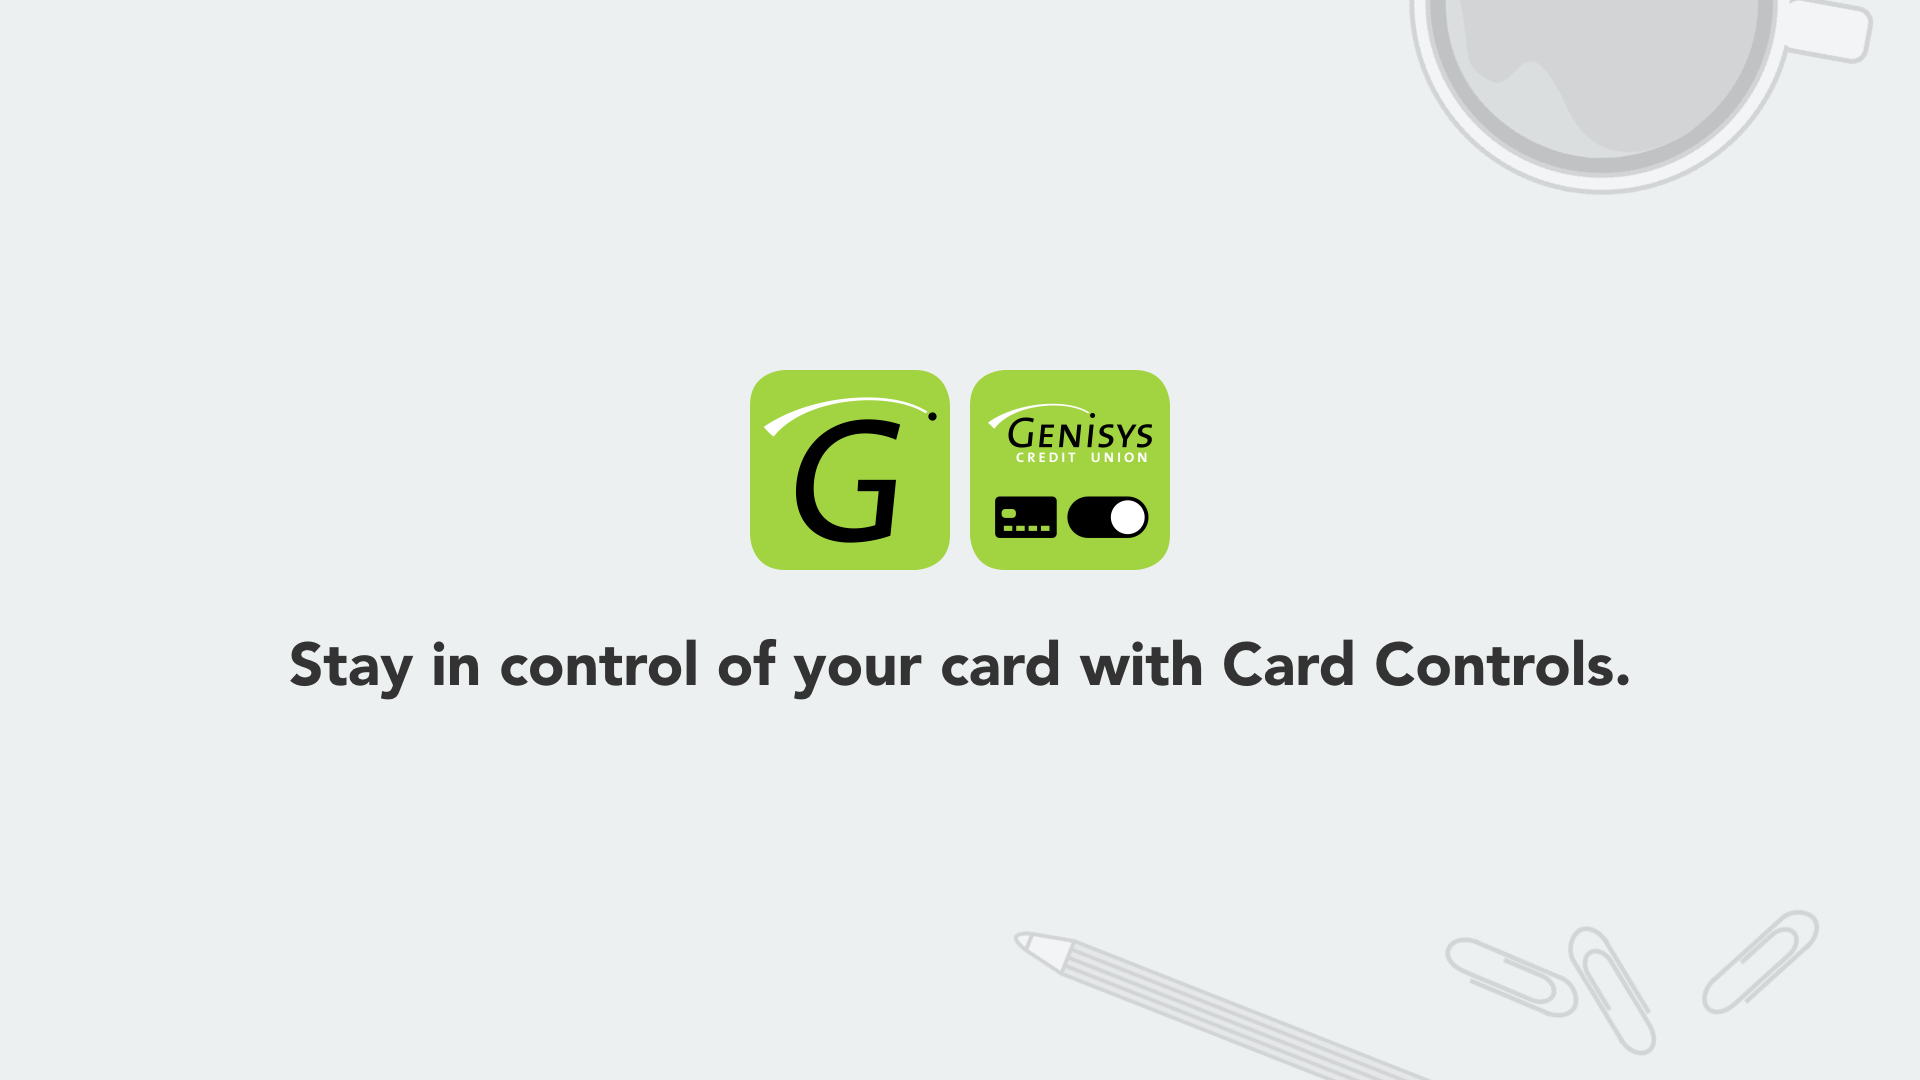 How do I use the CreditCardIndexGen Generator? : Support